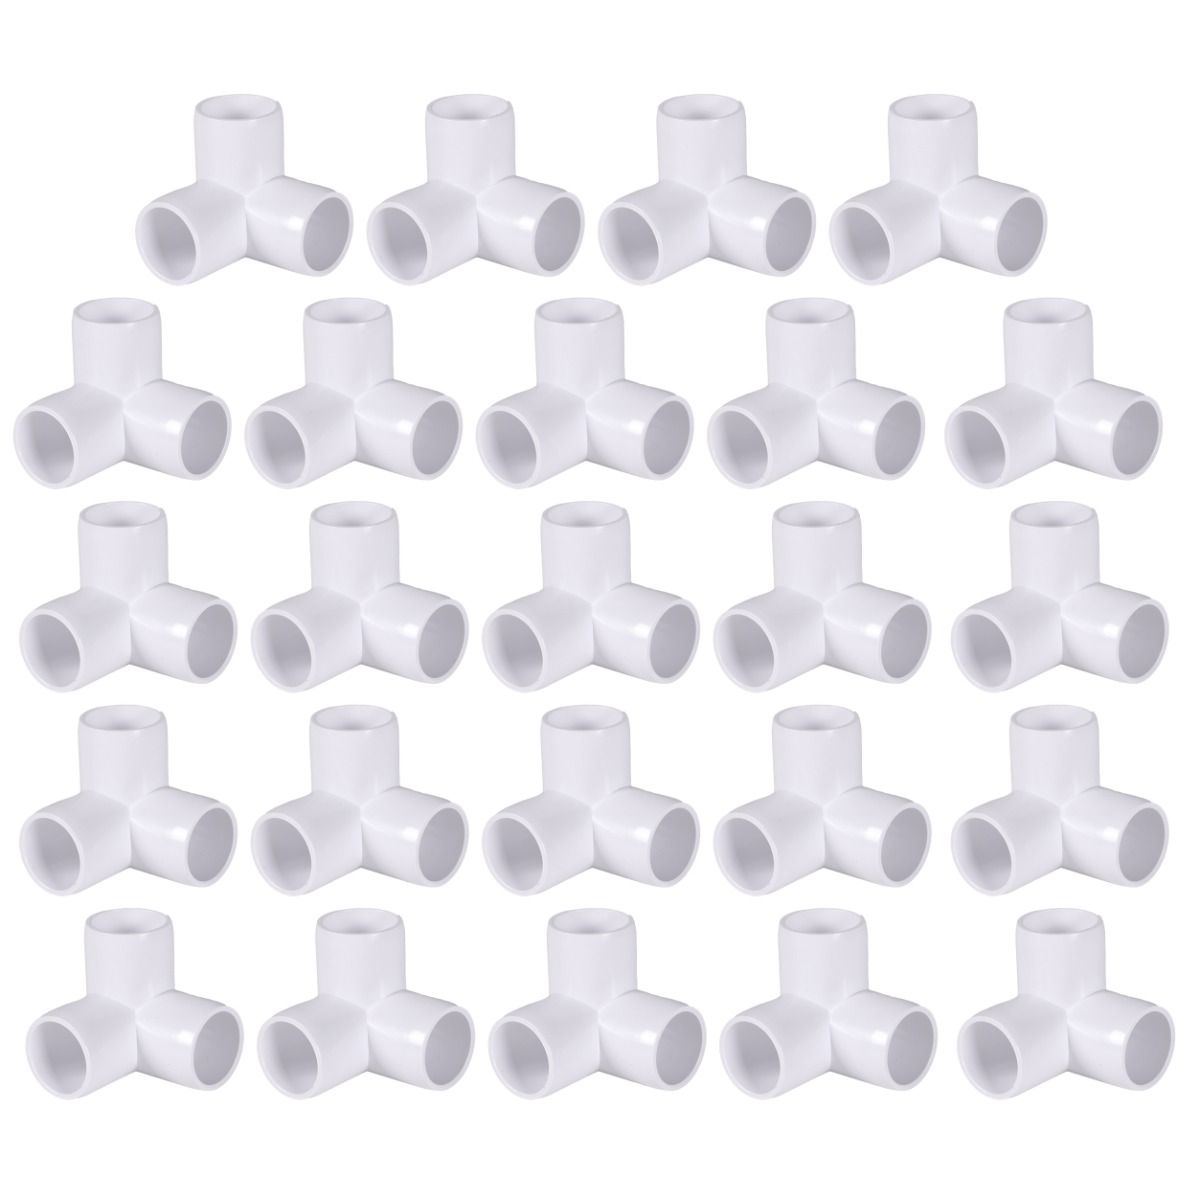 Garden Support Structure Storage Frame PVC Elbow Fittings PVC Pipe Connector for Greenhouse Shed Pipe Fittings 24 Pack 3 Way 1/2 in PVC Fittings Tent Connection 